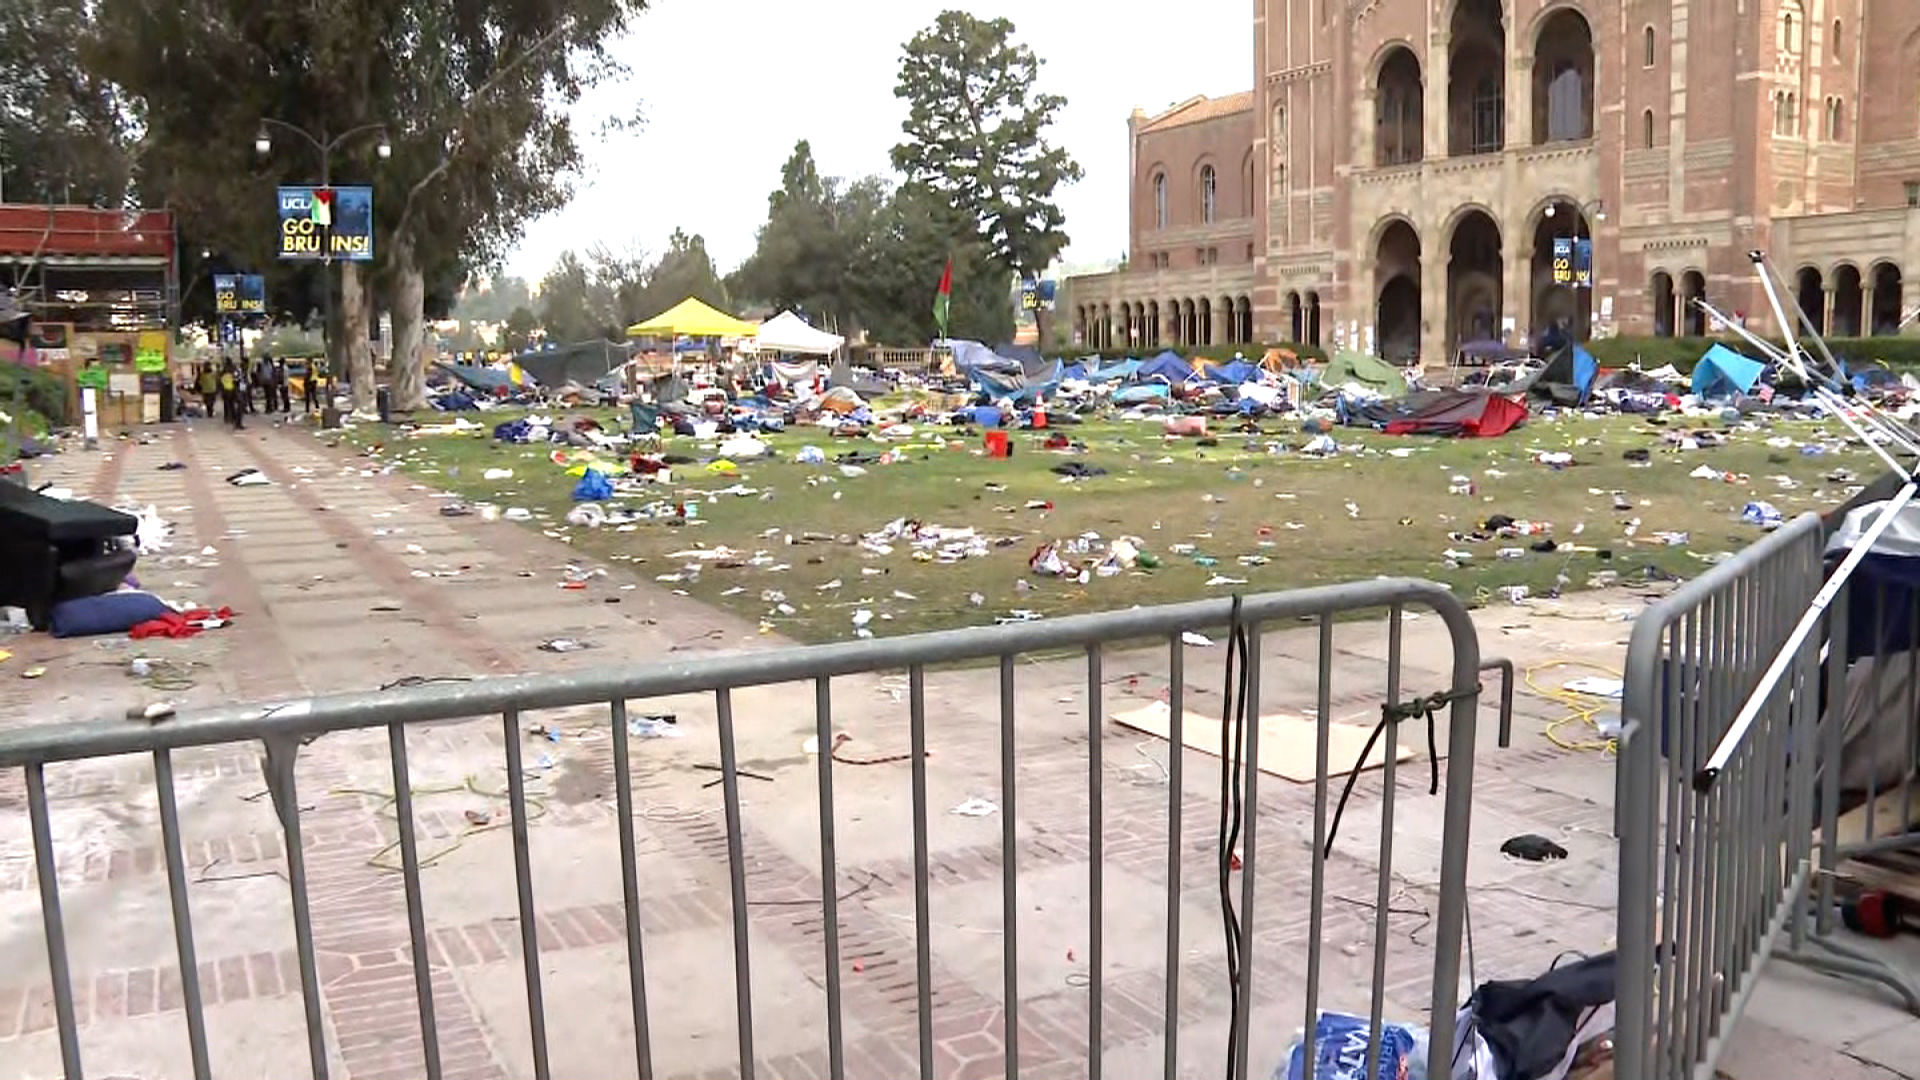 Tents and debris left behind by protesters are seen on UCLA’s campus on Thursday morning.